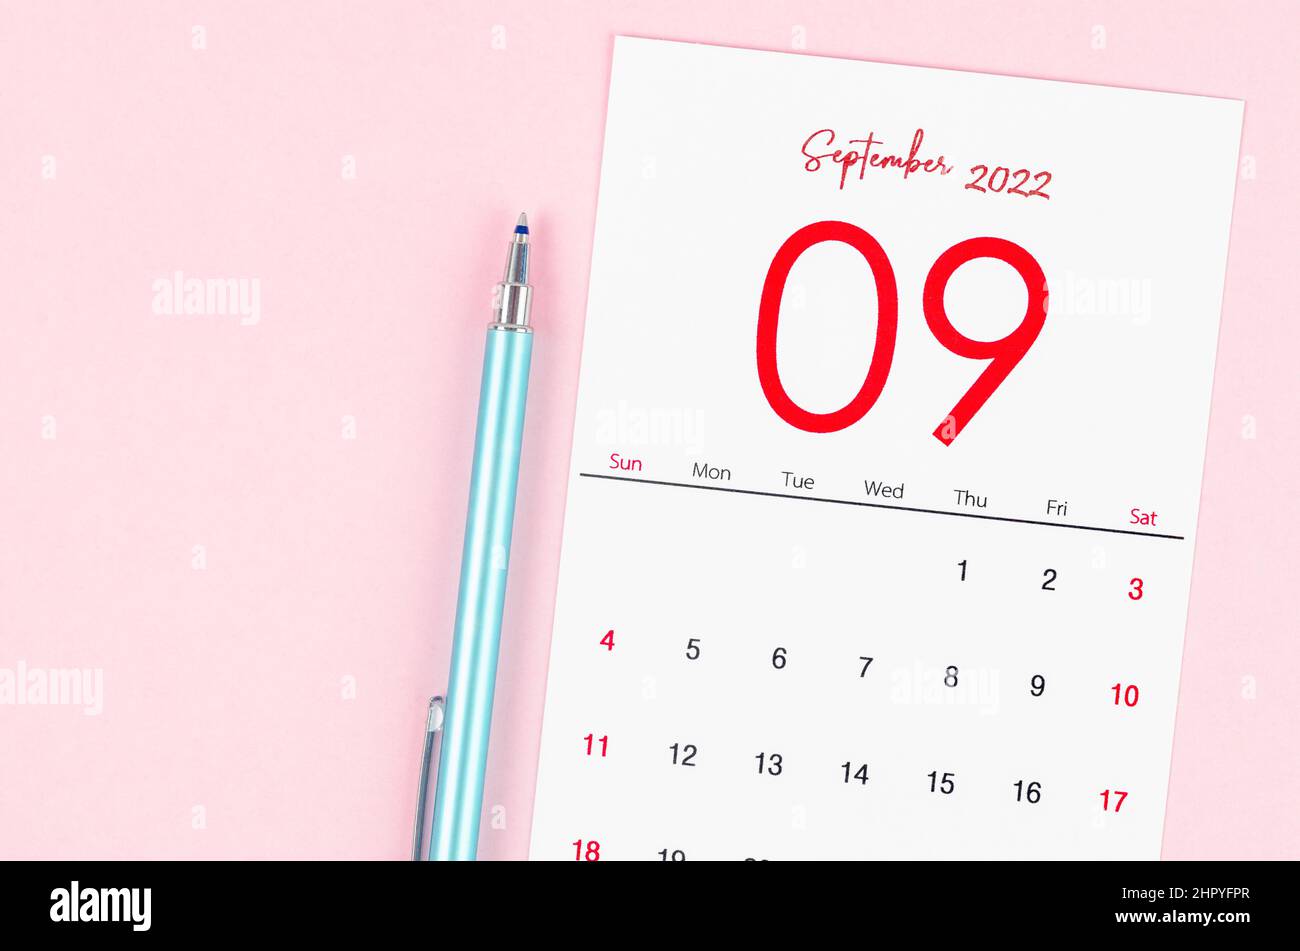 The September 2022 calendar with pen on pink background. Stock Photo